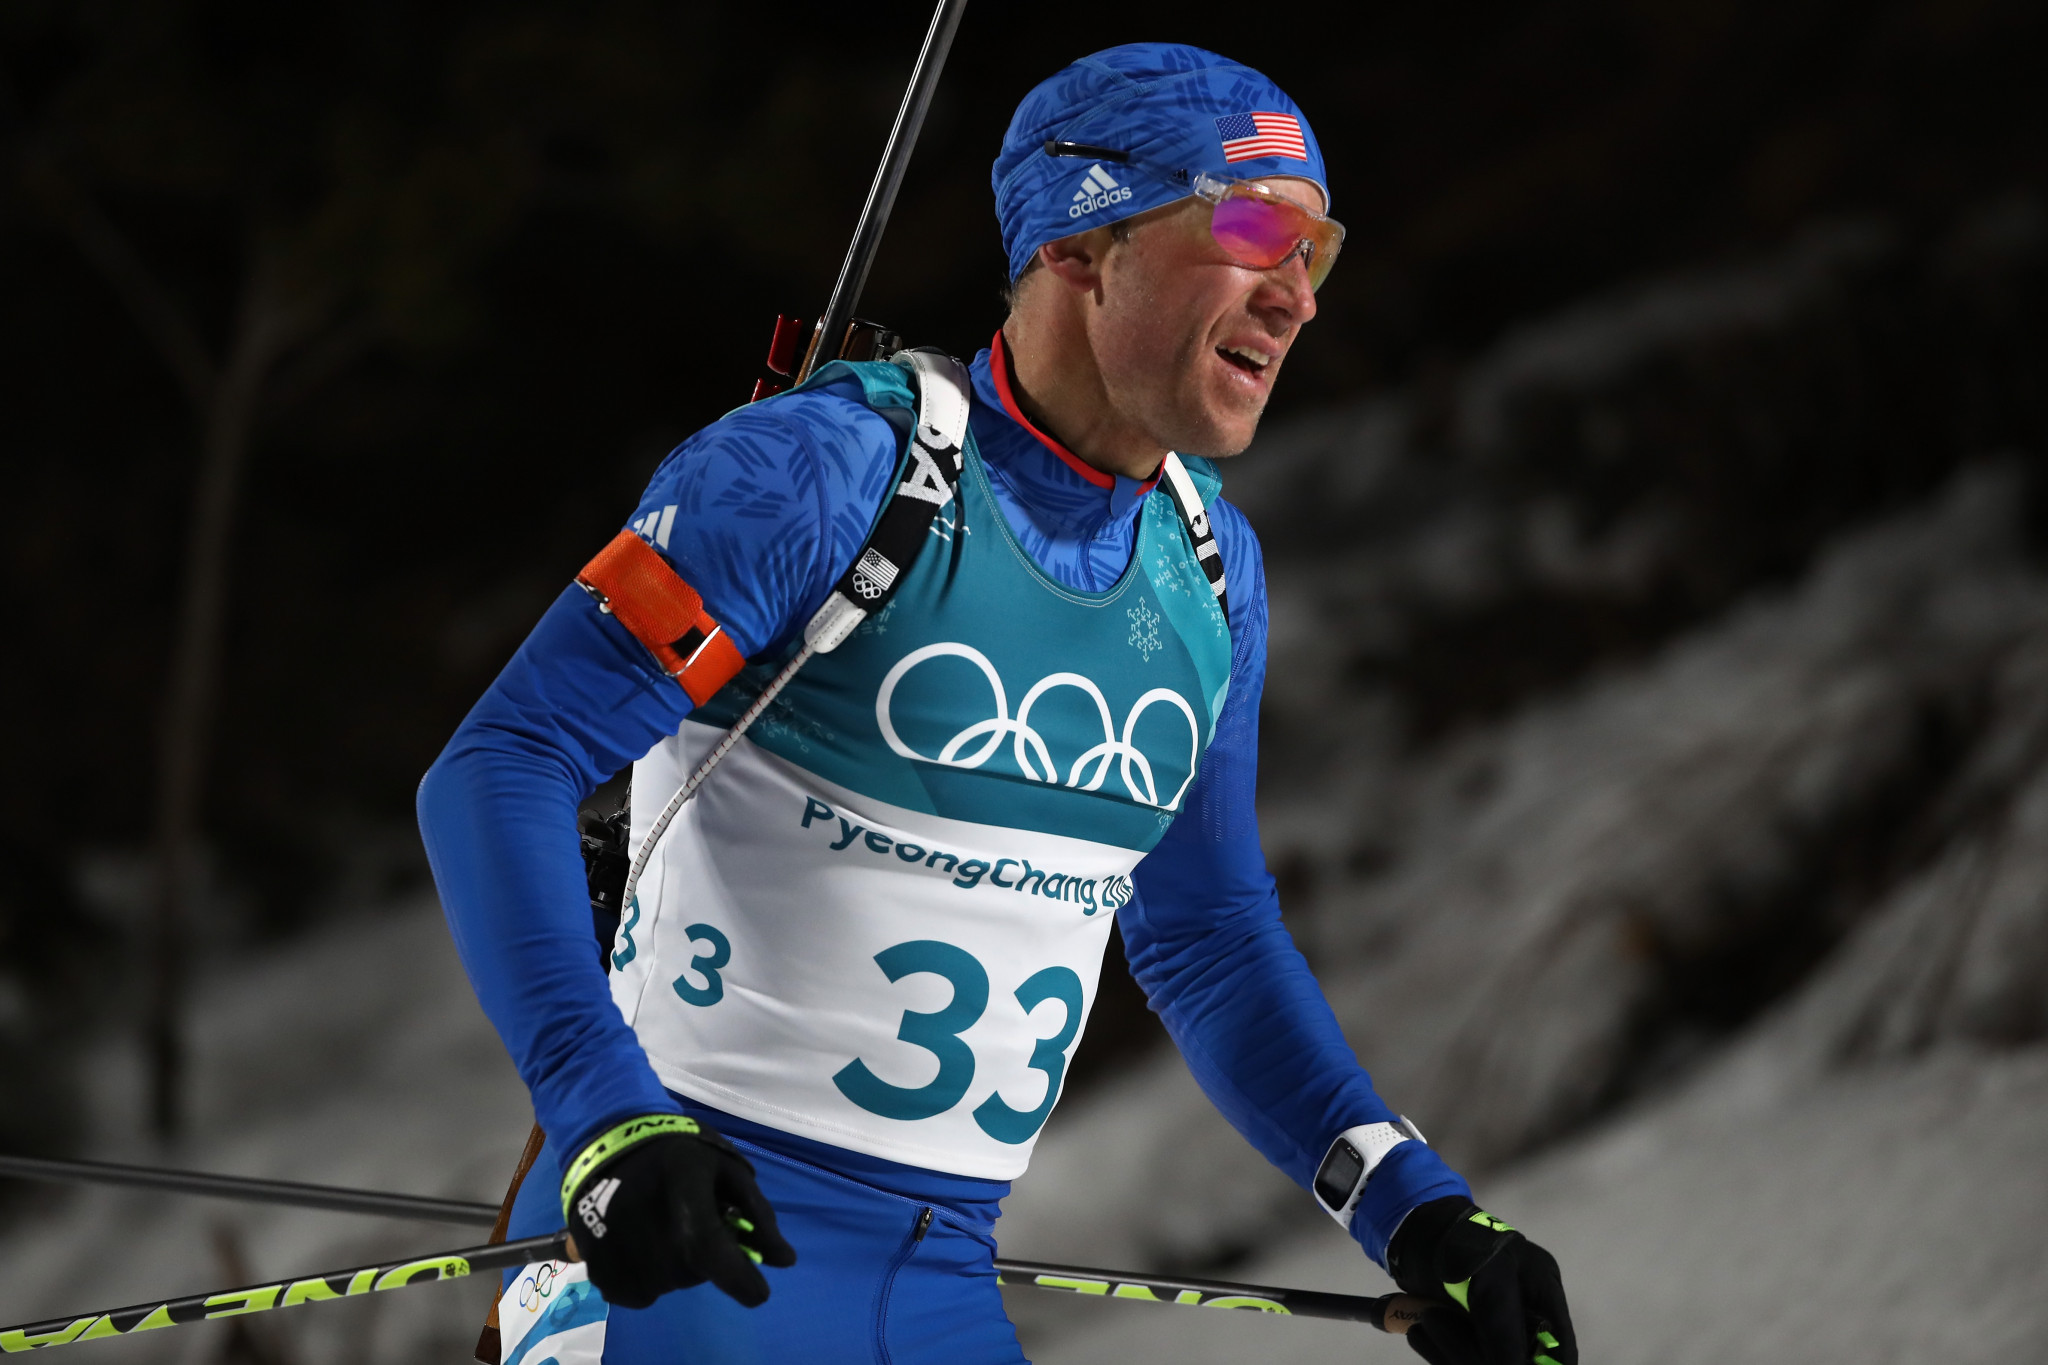 Former world champion Lowell Bailey is high-performance director at US Biathlon ©Getty Images